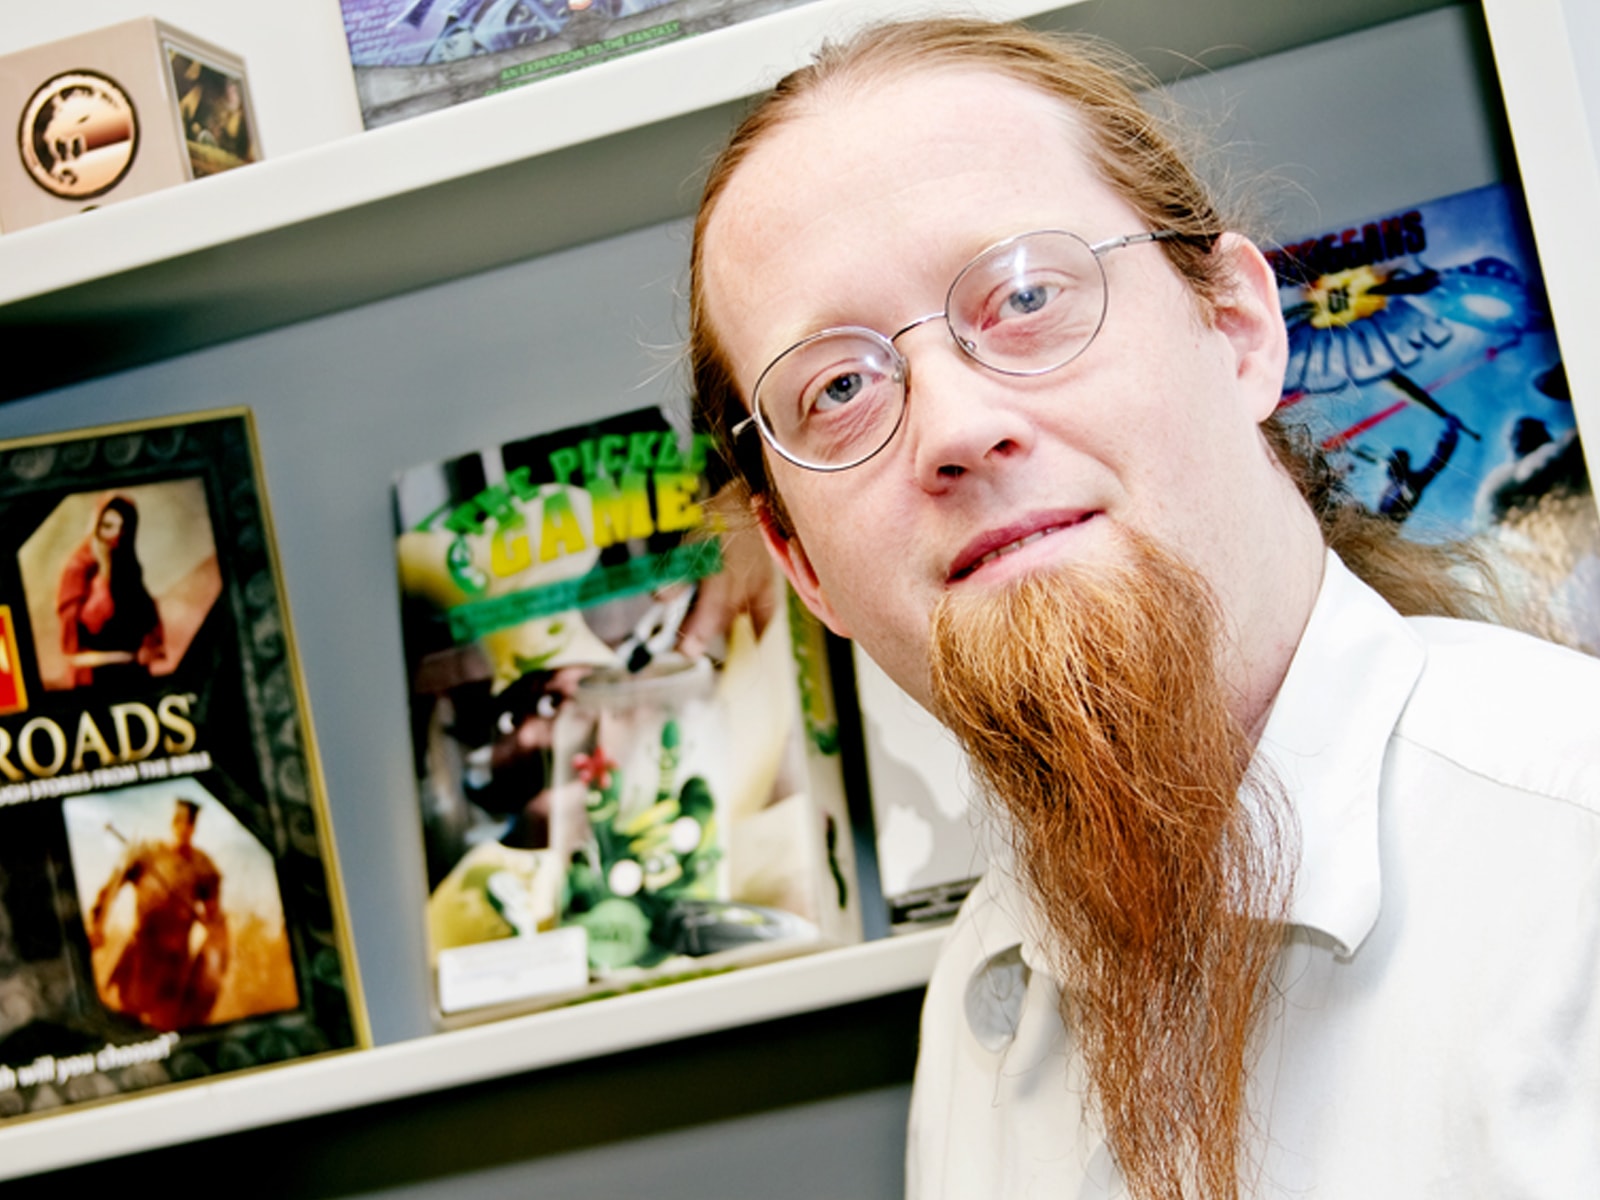 DigiPen game design lecturer Jeremy Holcomb in front of a bookshelf filled with games in his office